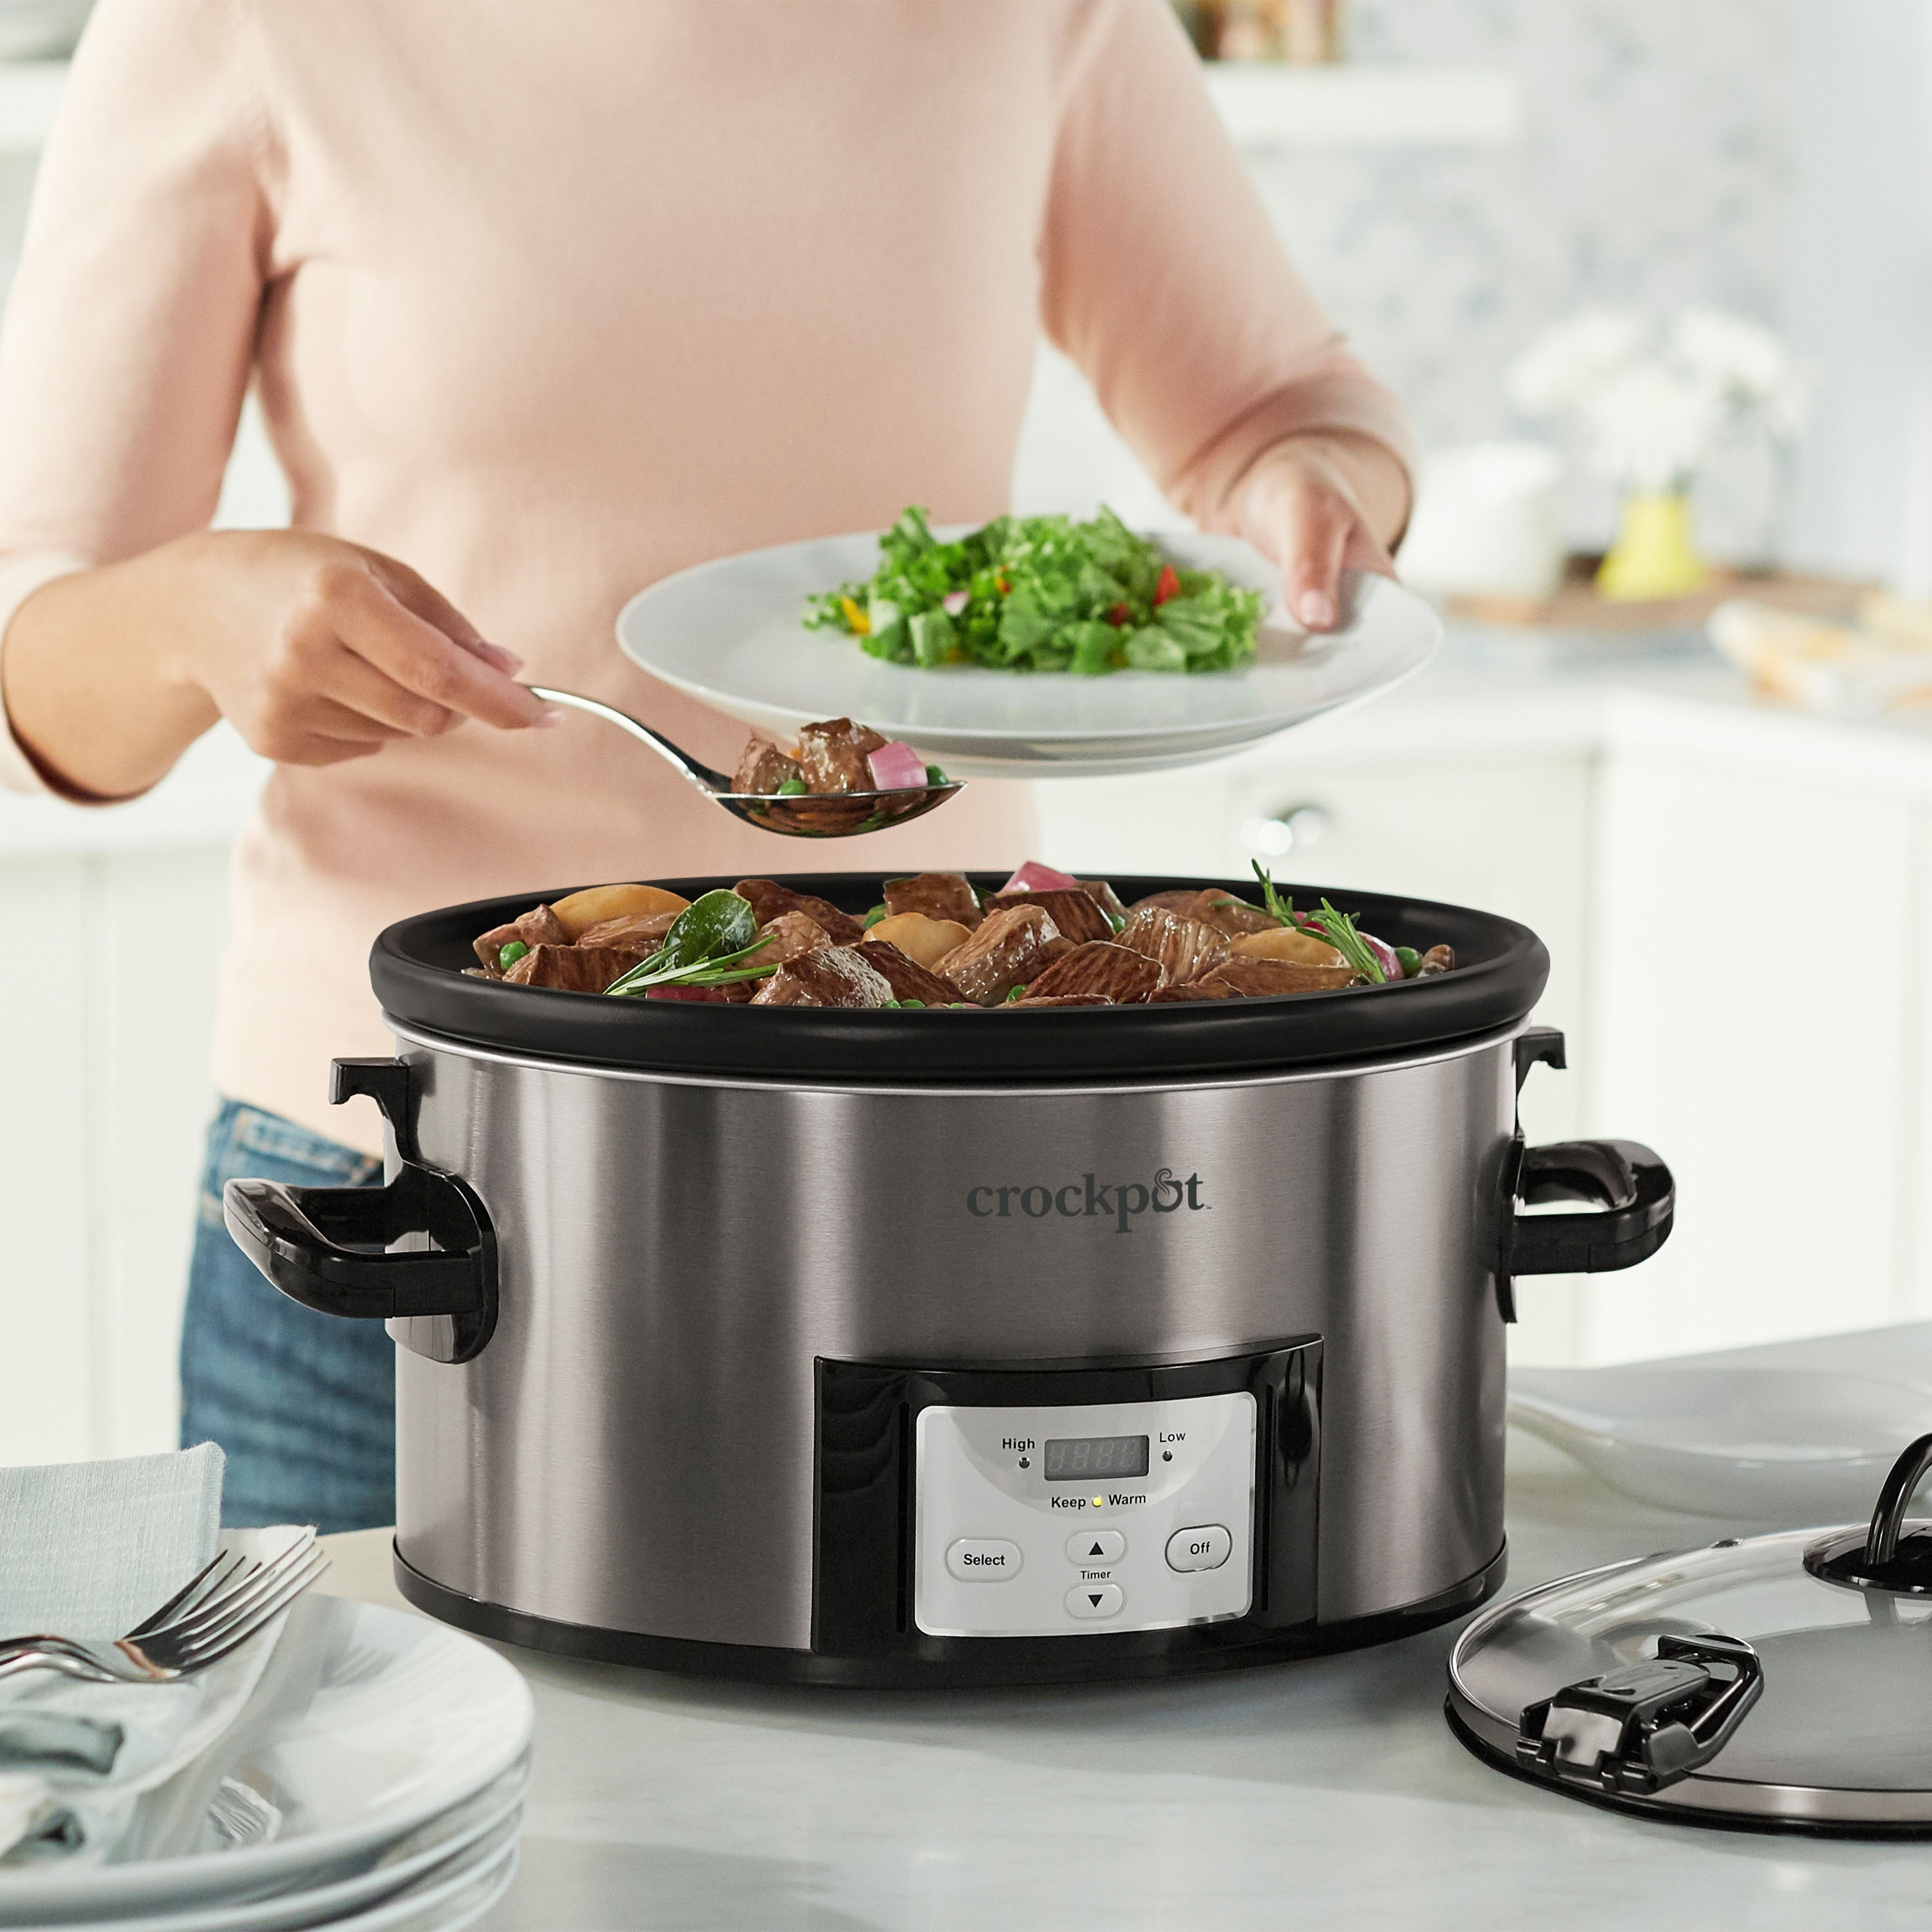 https://ak1.ostkcdn.com/images/products/is/images/direct/ba41227eea805c026b2fb79d74587611a32f7538/Crockpot-7-Quart-Easy-to-Clean-Cook-%26-Carry-Slow-Cooker%2C-Black-Stainless-Steel.jpg